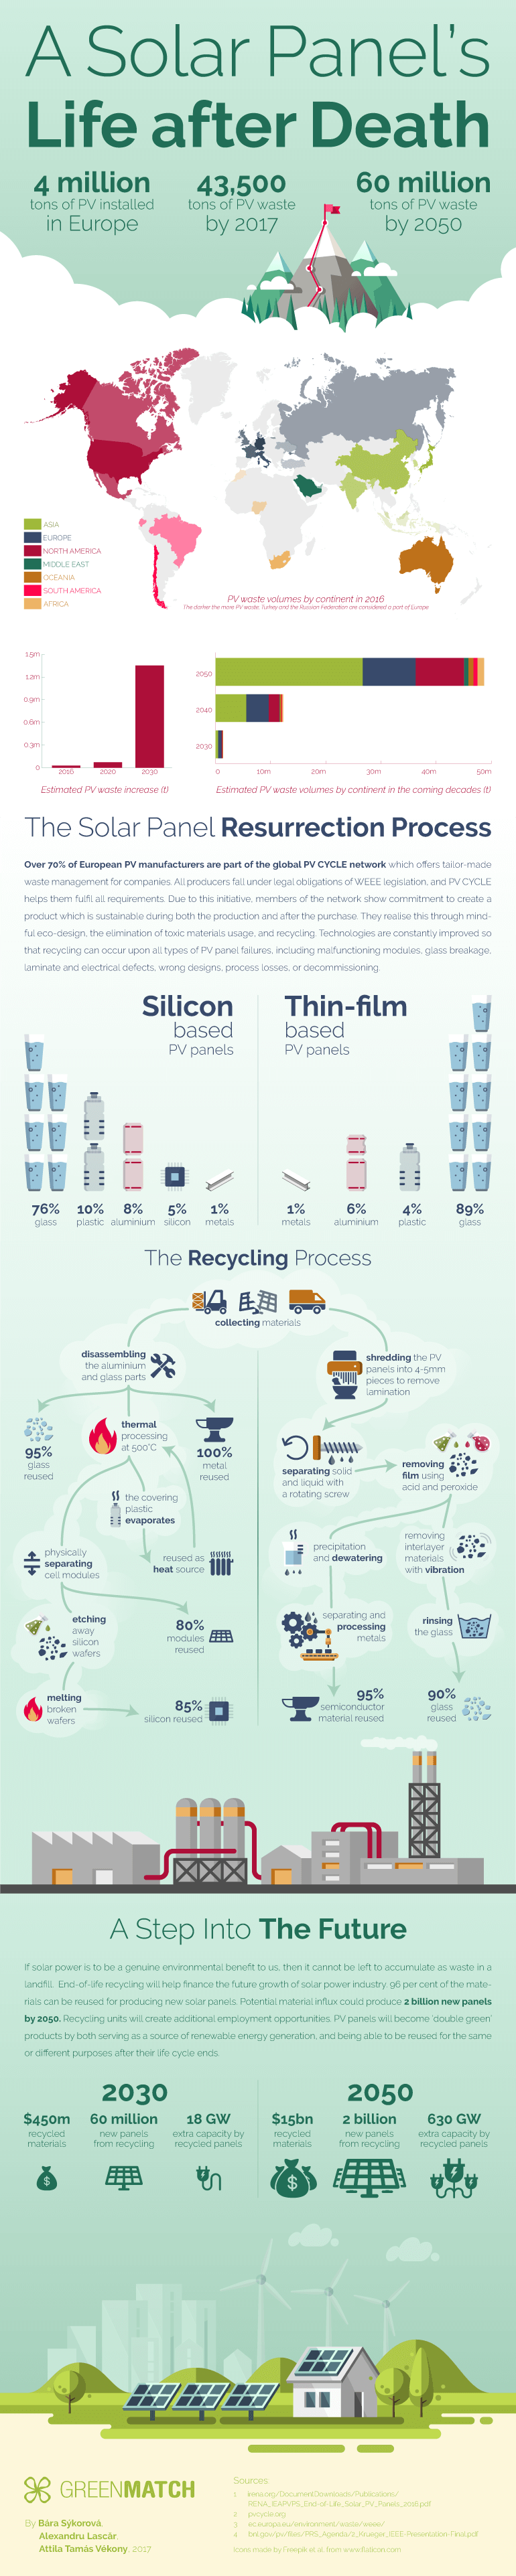 infographic on solar panel recycling